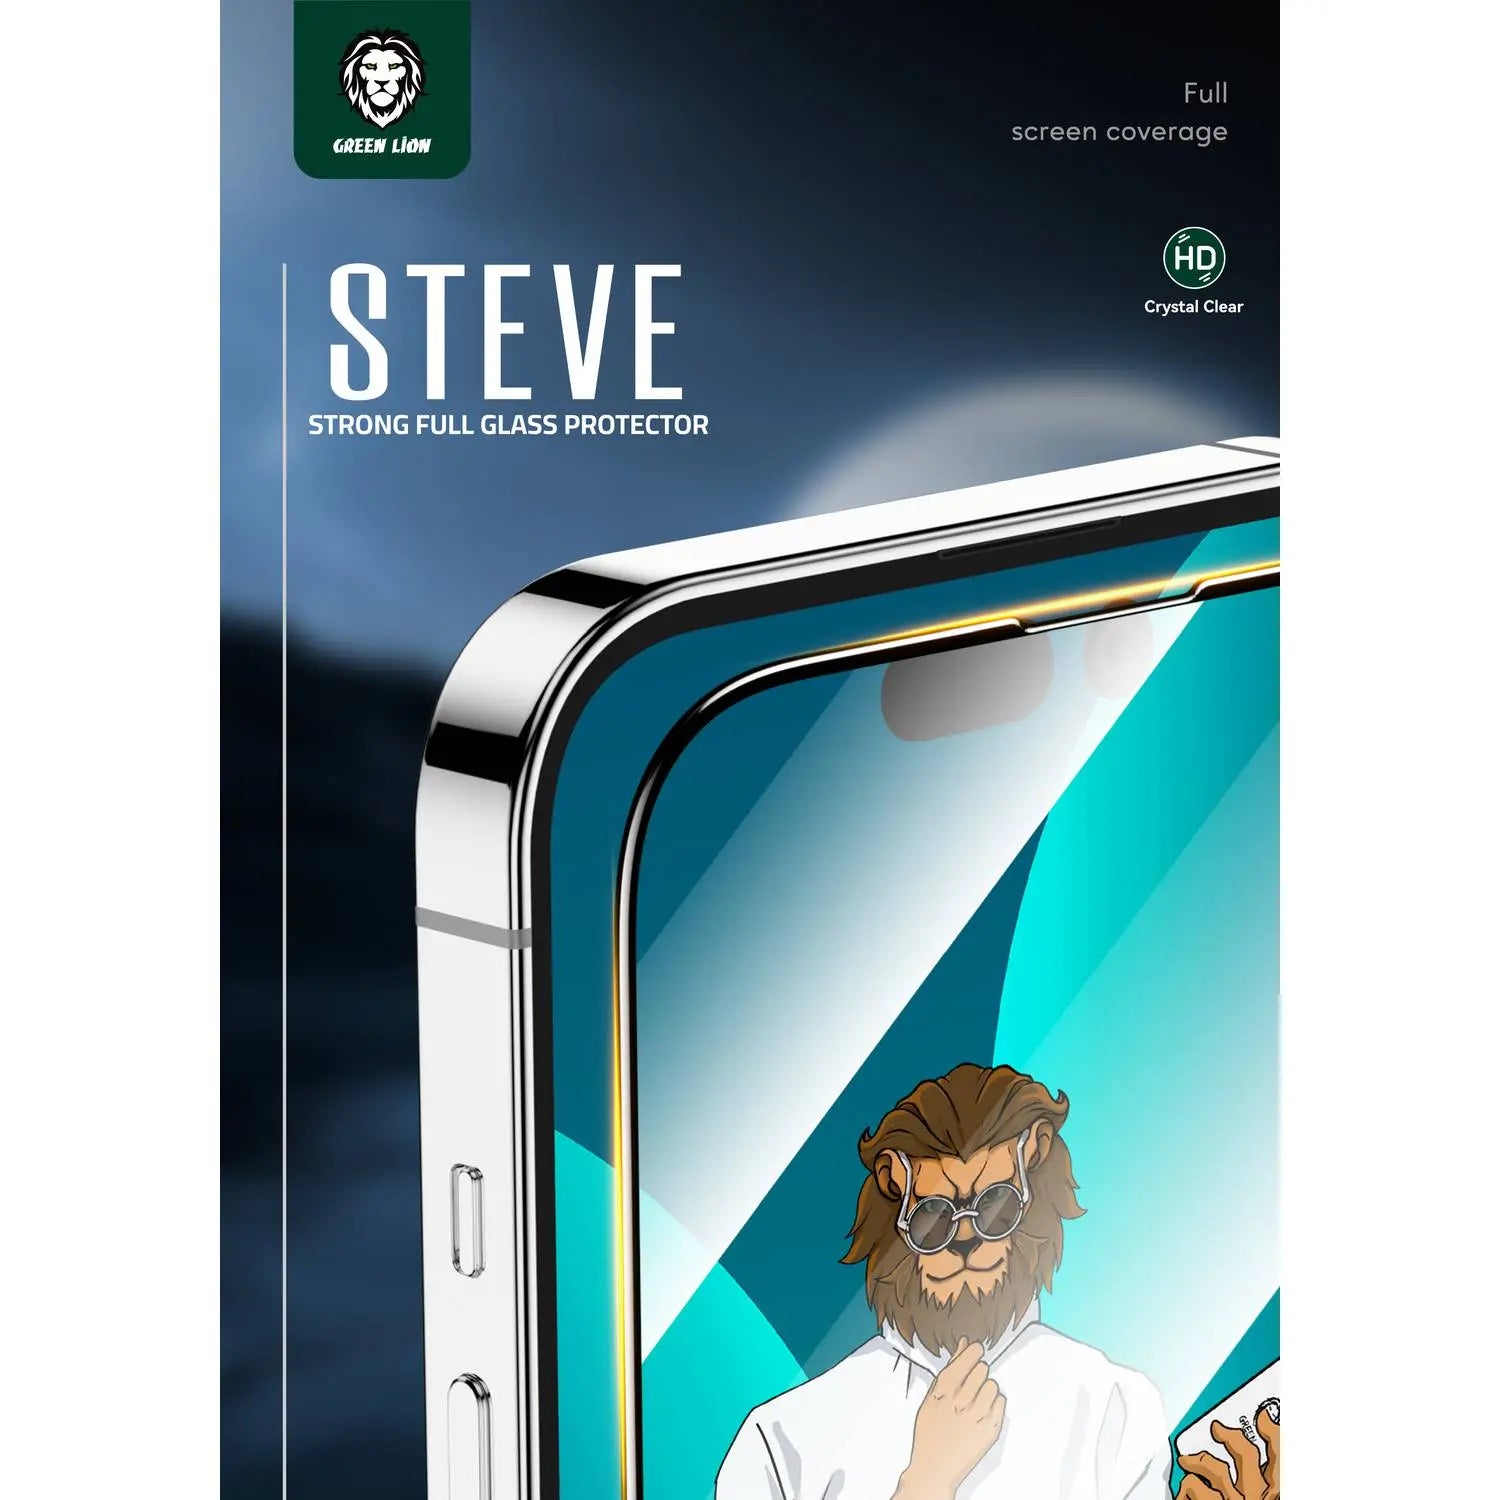 Green 9H Steve Glass Strong Full Screen Protector for iPhone 14 Pro ( 6.1" ) - Clear